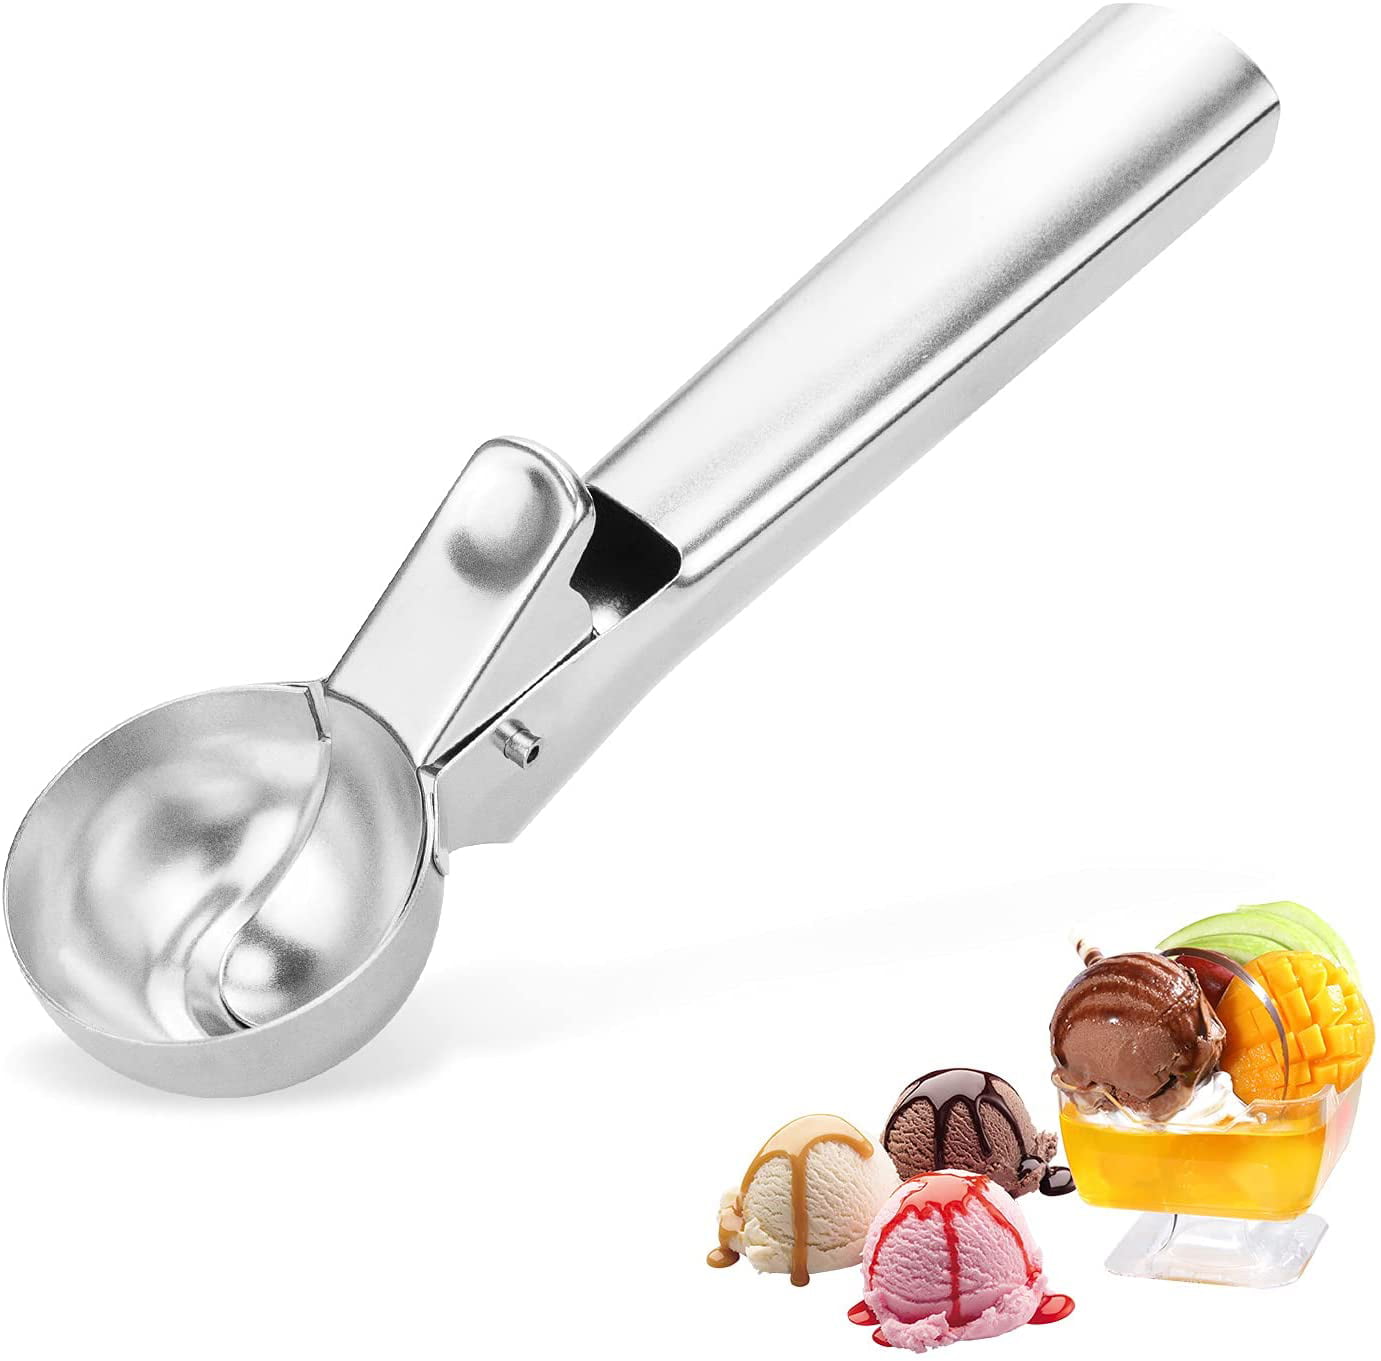 Easy Trigger Ice Cream Ball Spoon Scoop Maker Solid Stainless Steel Non Stick 